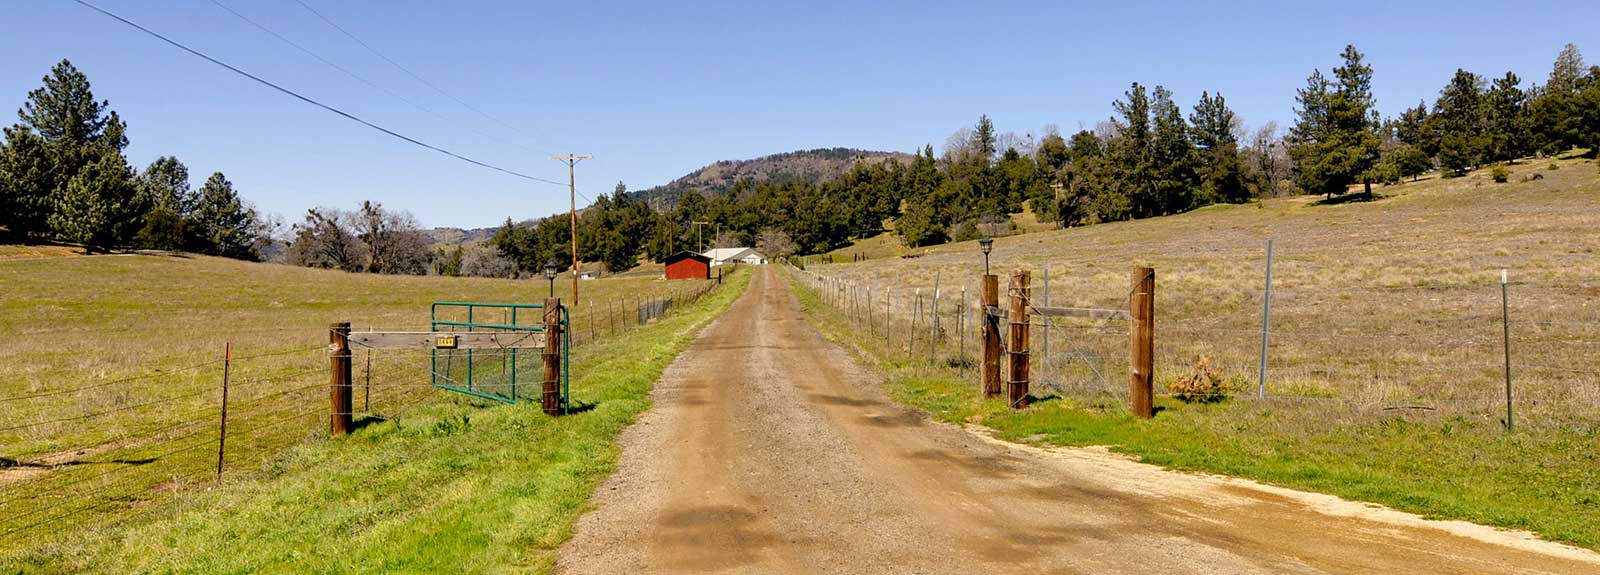 dirt road leading to red barn on a farm in julian ca